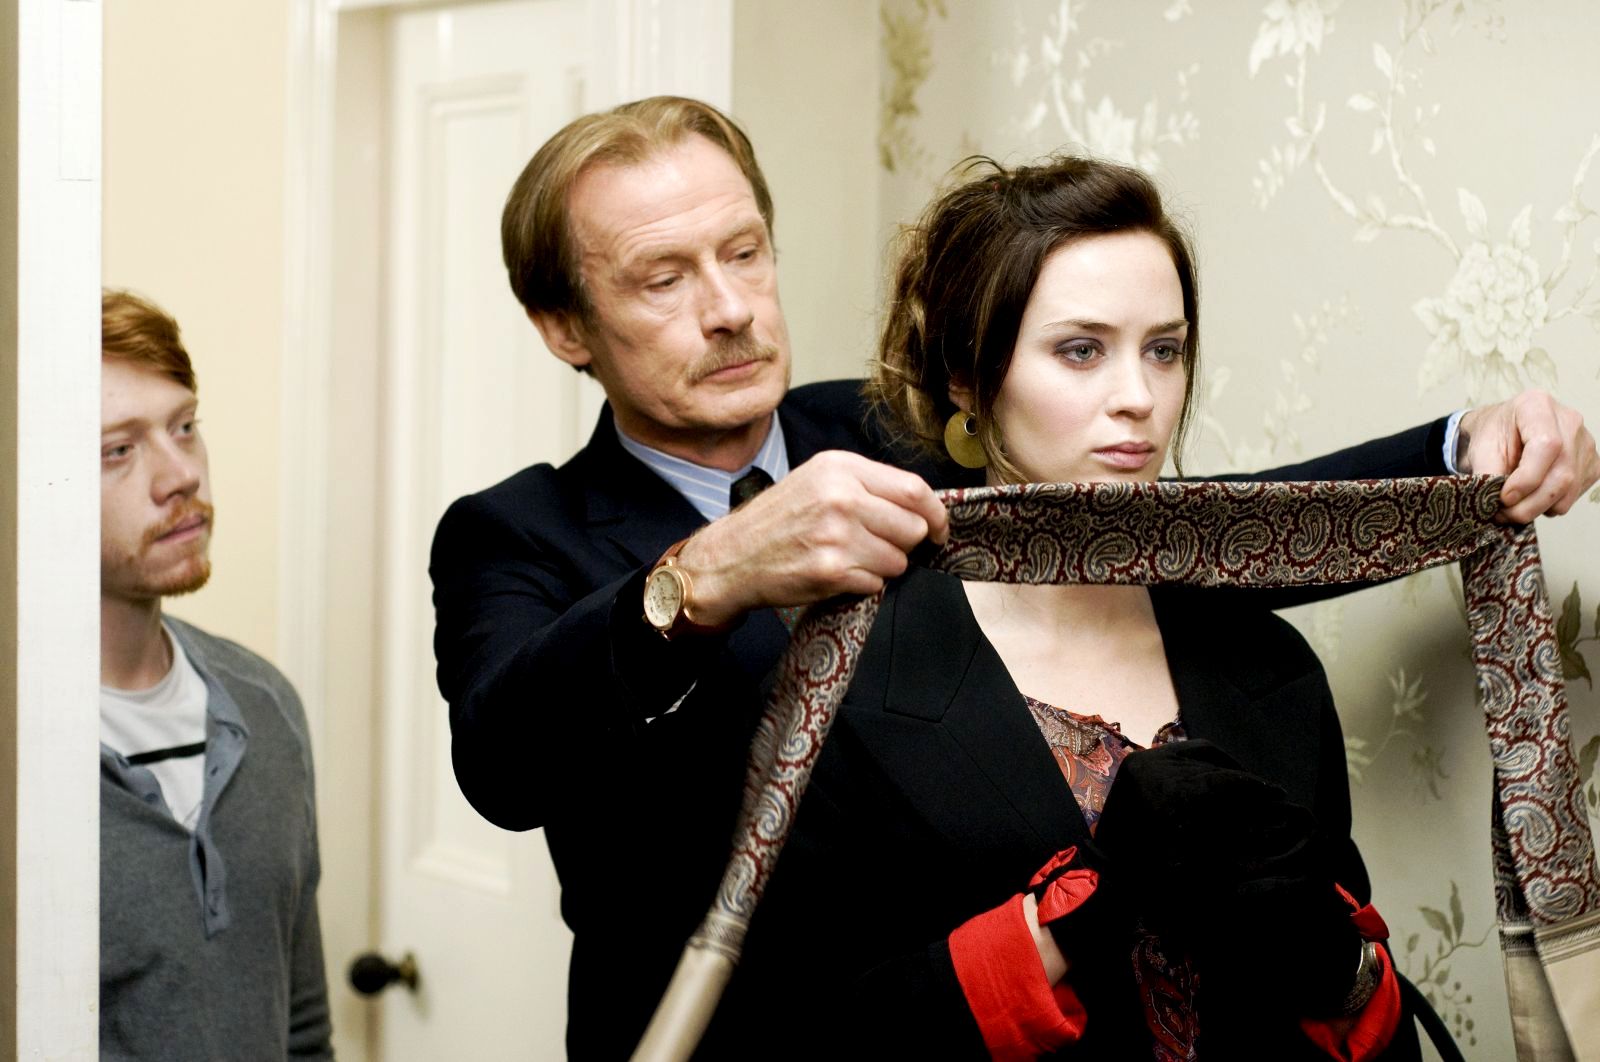 Rupert Grint, Bill Nighy and Emily Blunt in Freestyle Releasing's Wild Target (2010). Photo credit by: Nick.